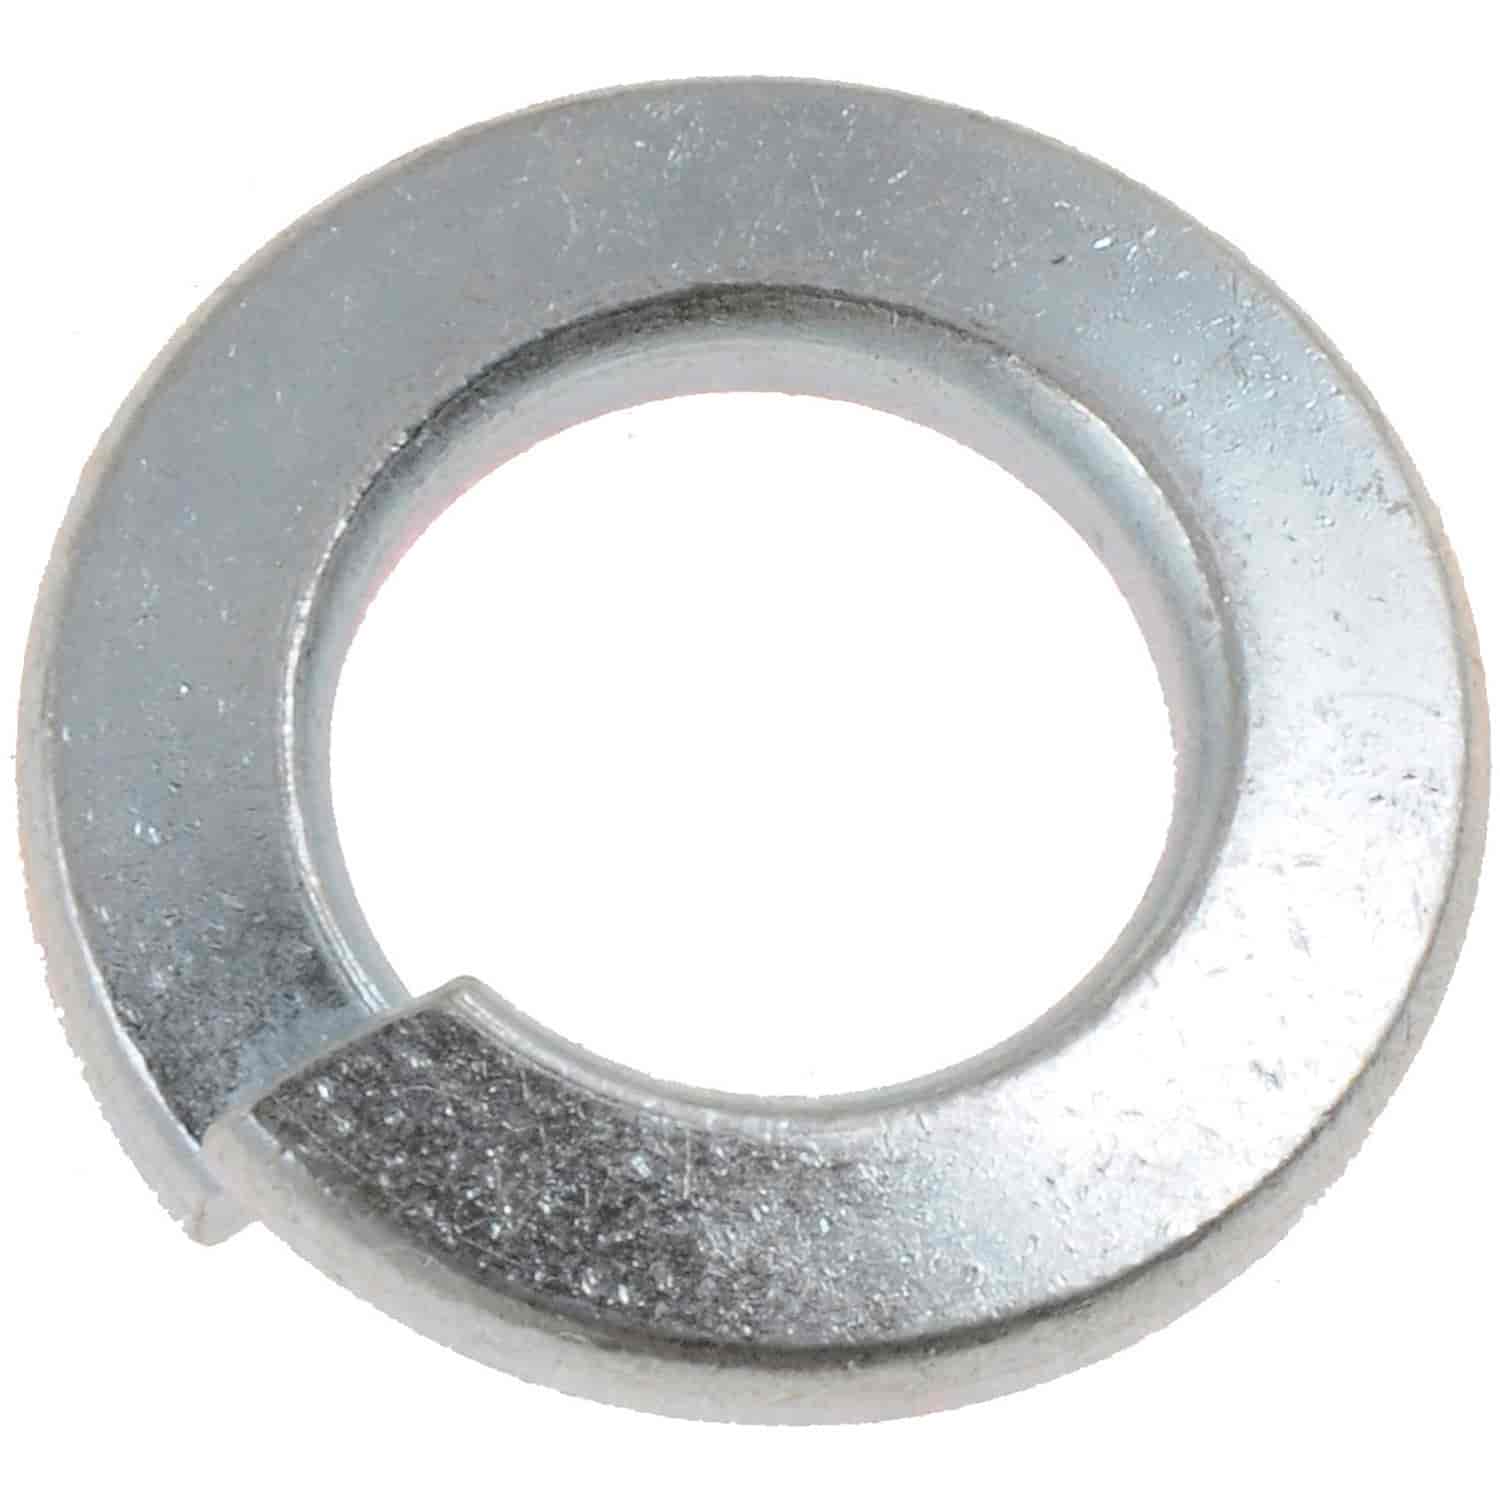 Flat Washer-Grade 5- 3/16 In